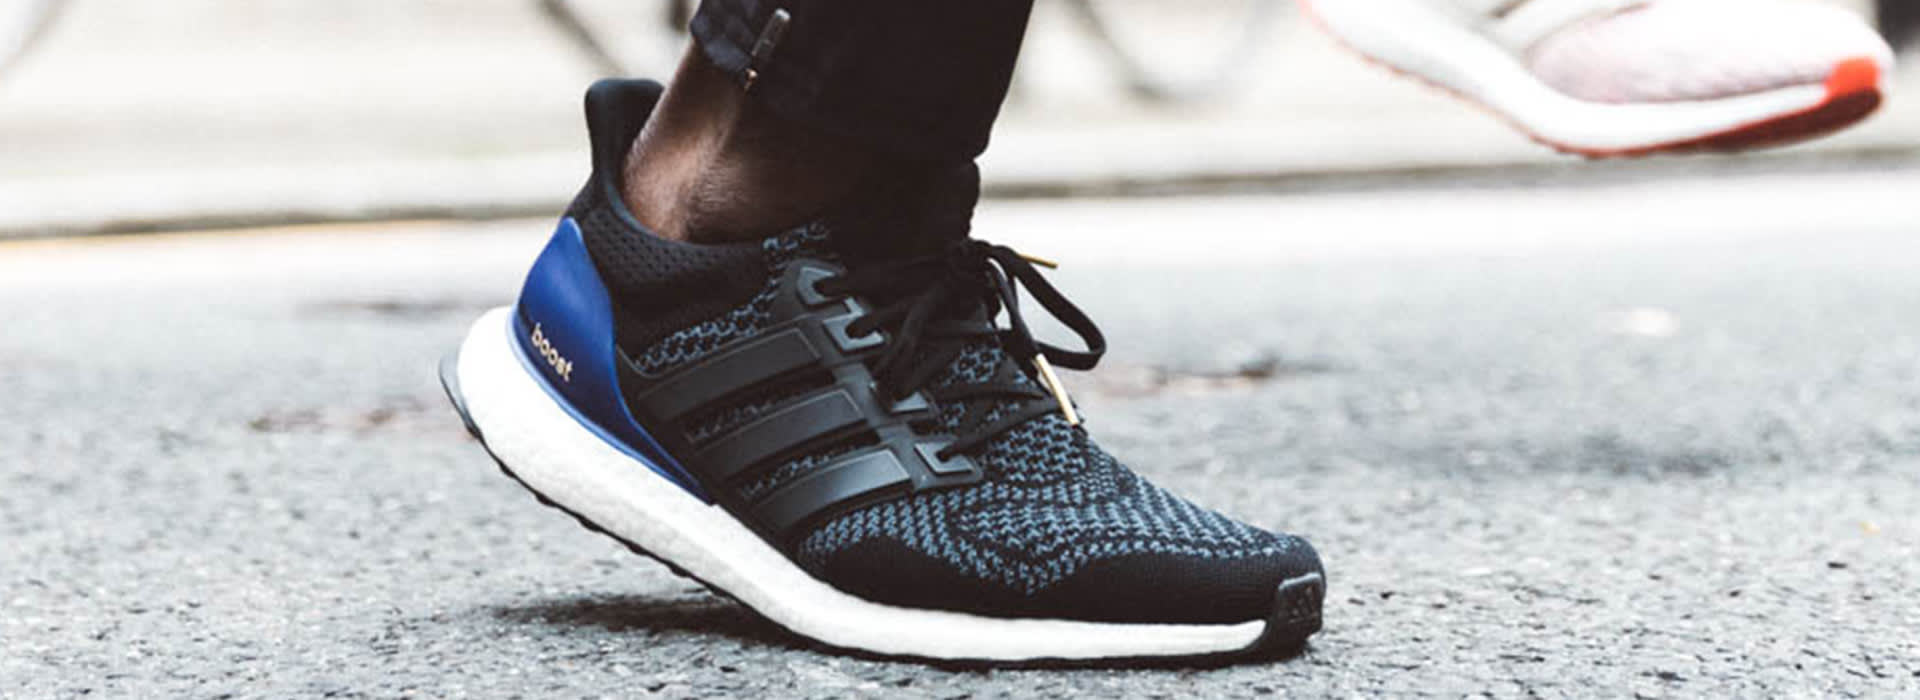 adidas energy boost fit